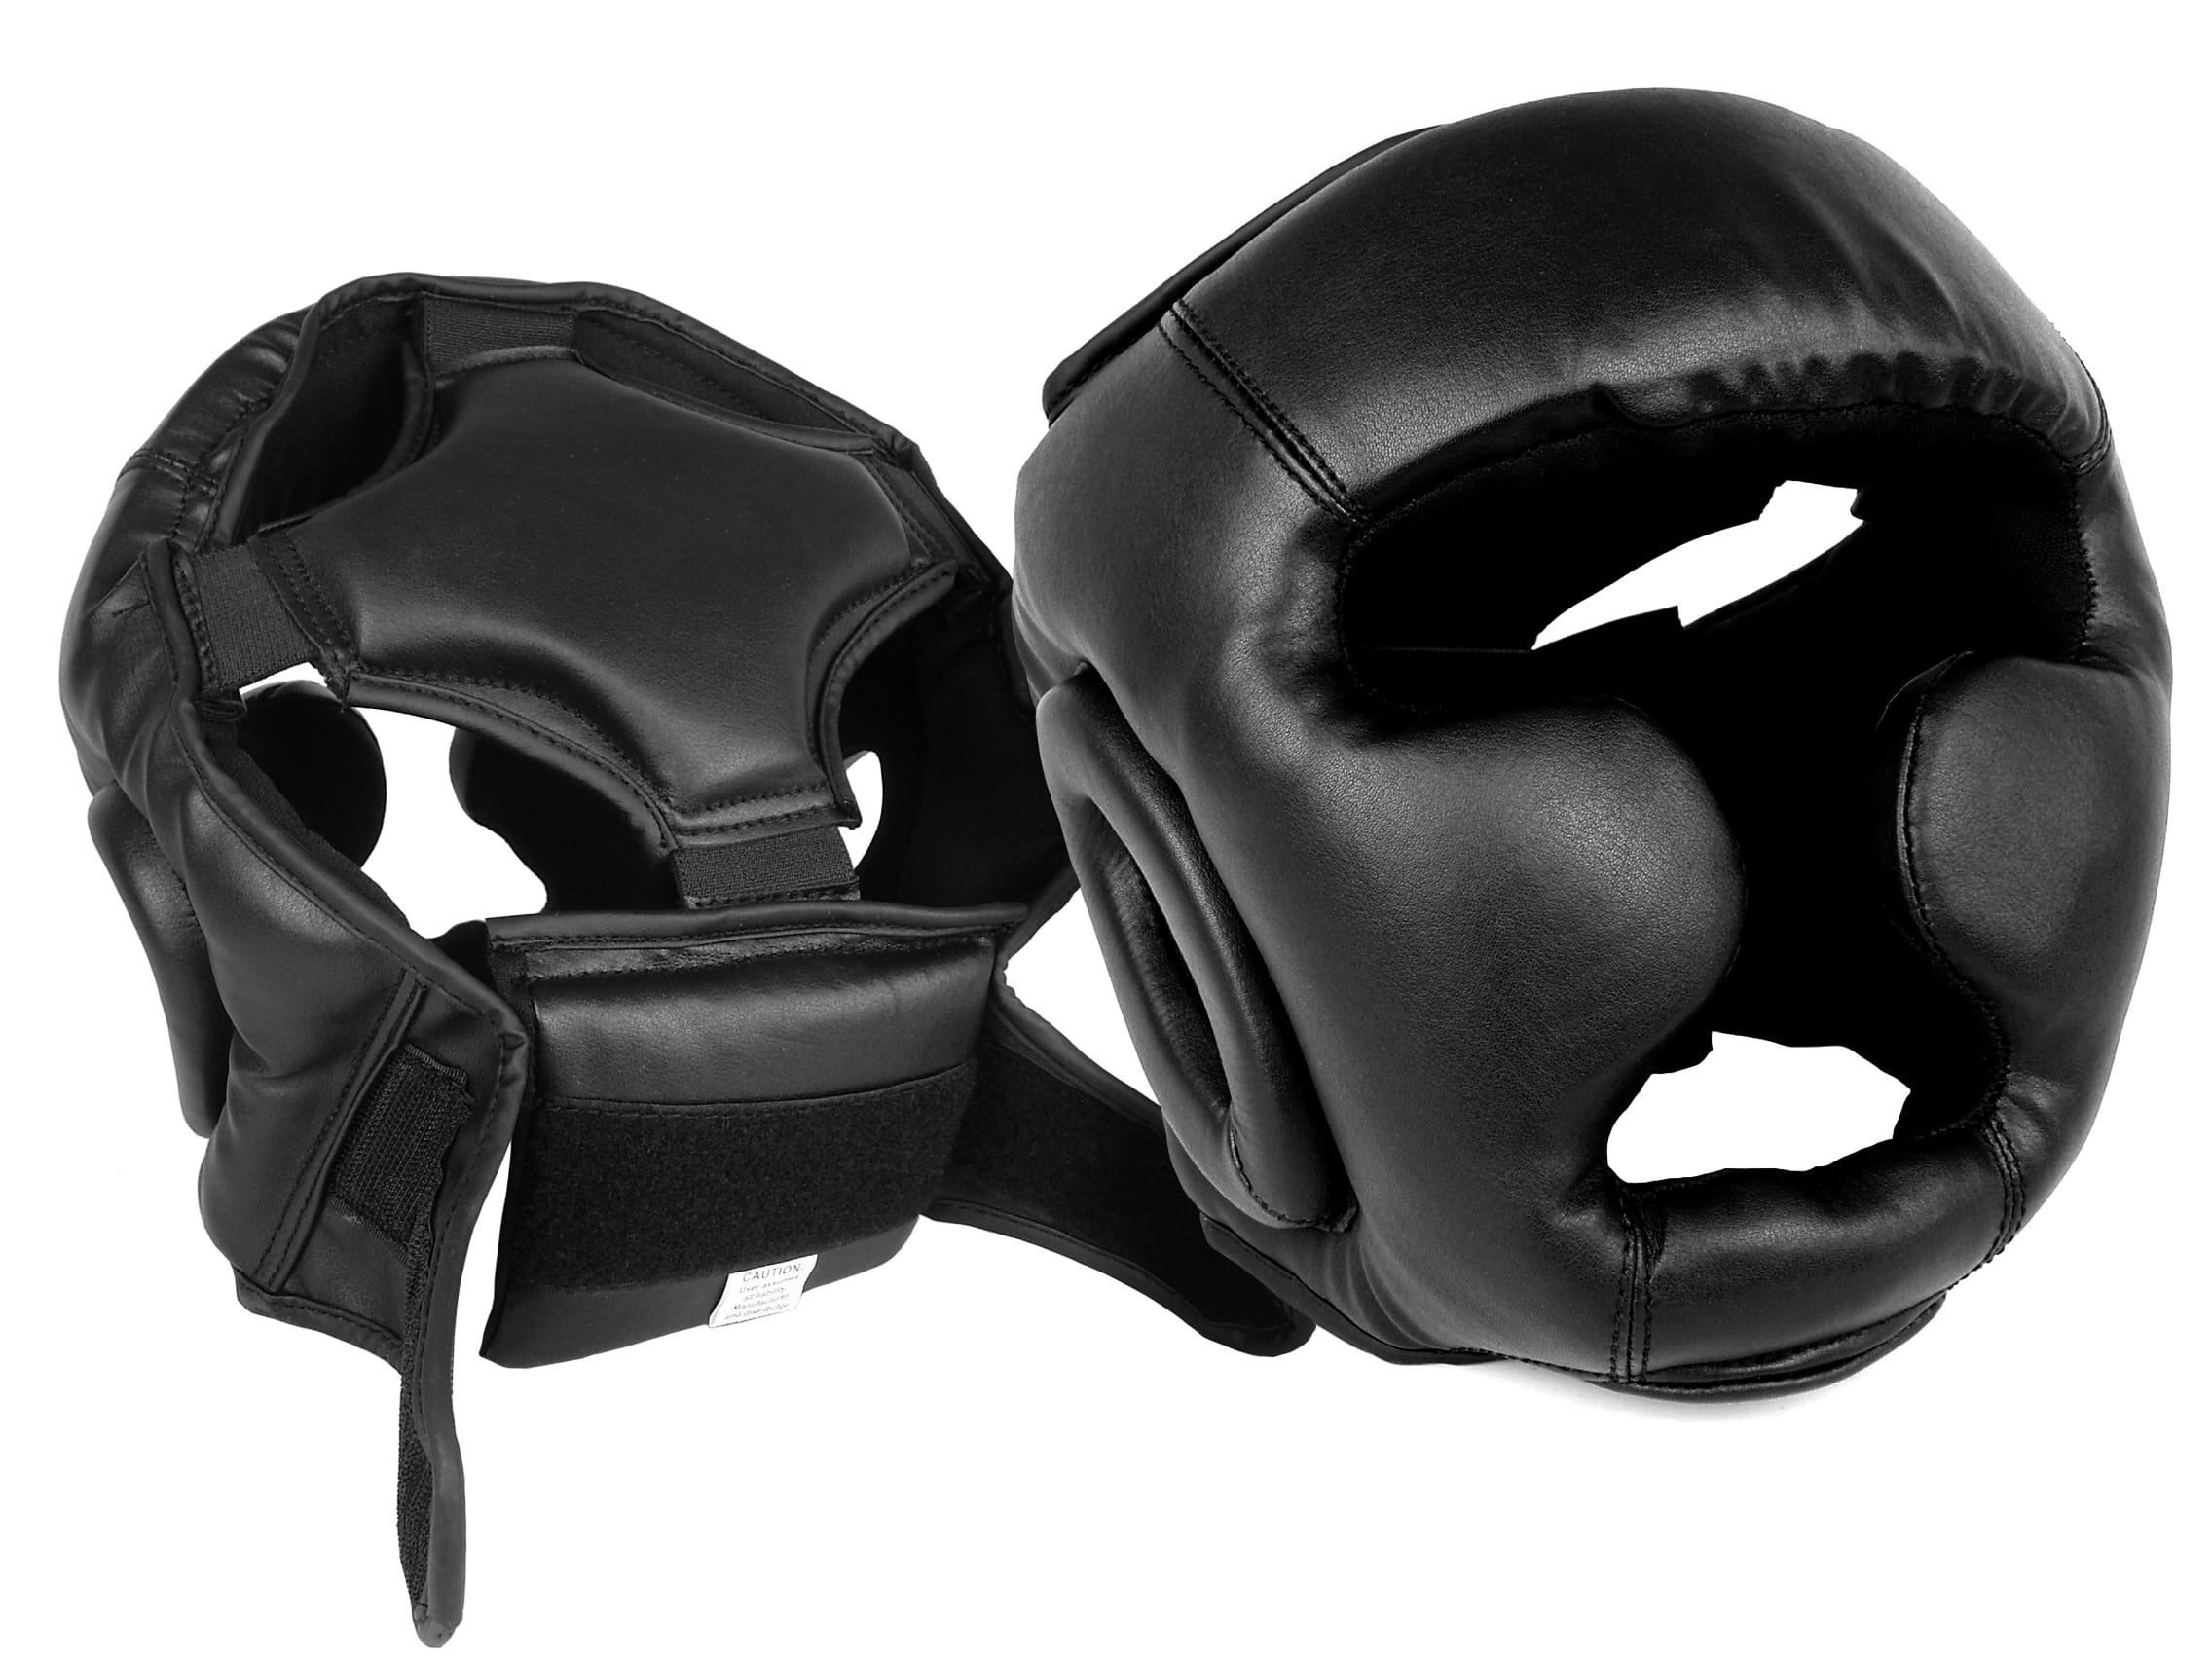 Pair Boxing Knuckle Protector Kickboxing Guard Protective Gear Black 